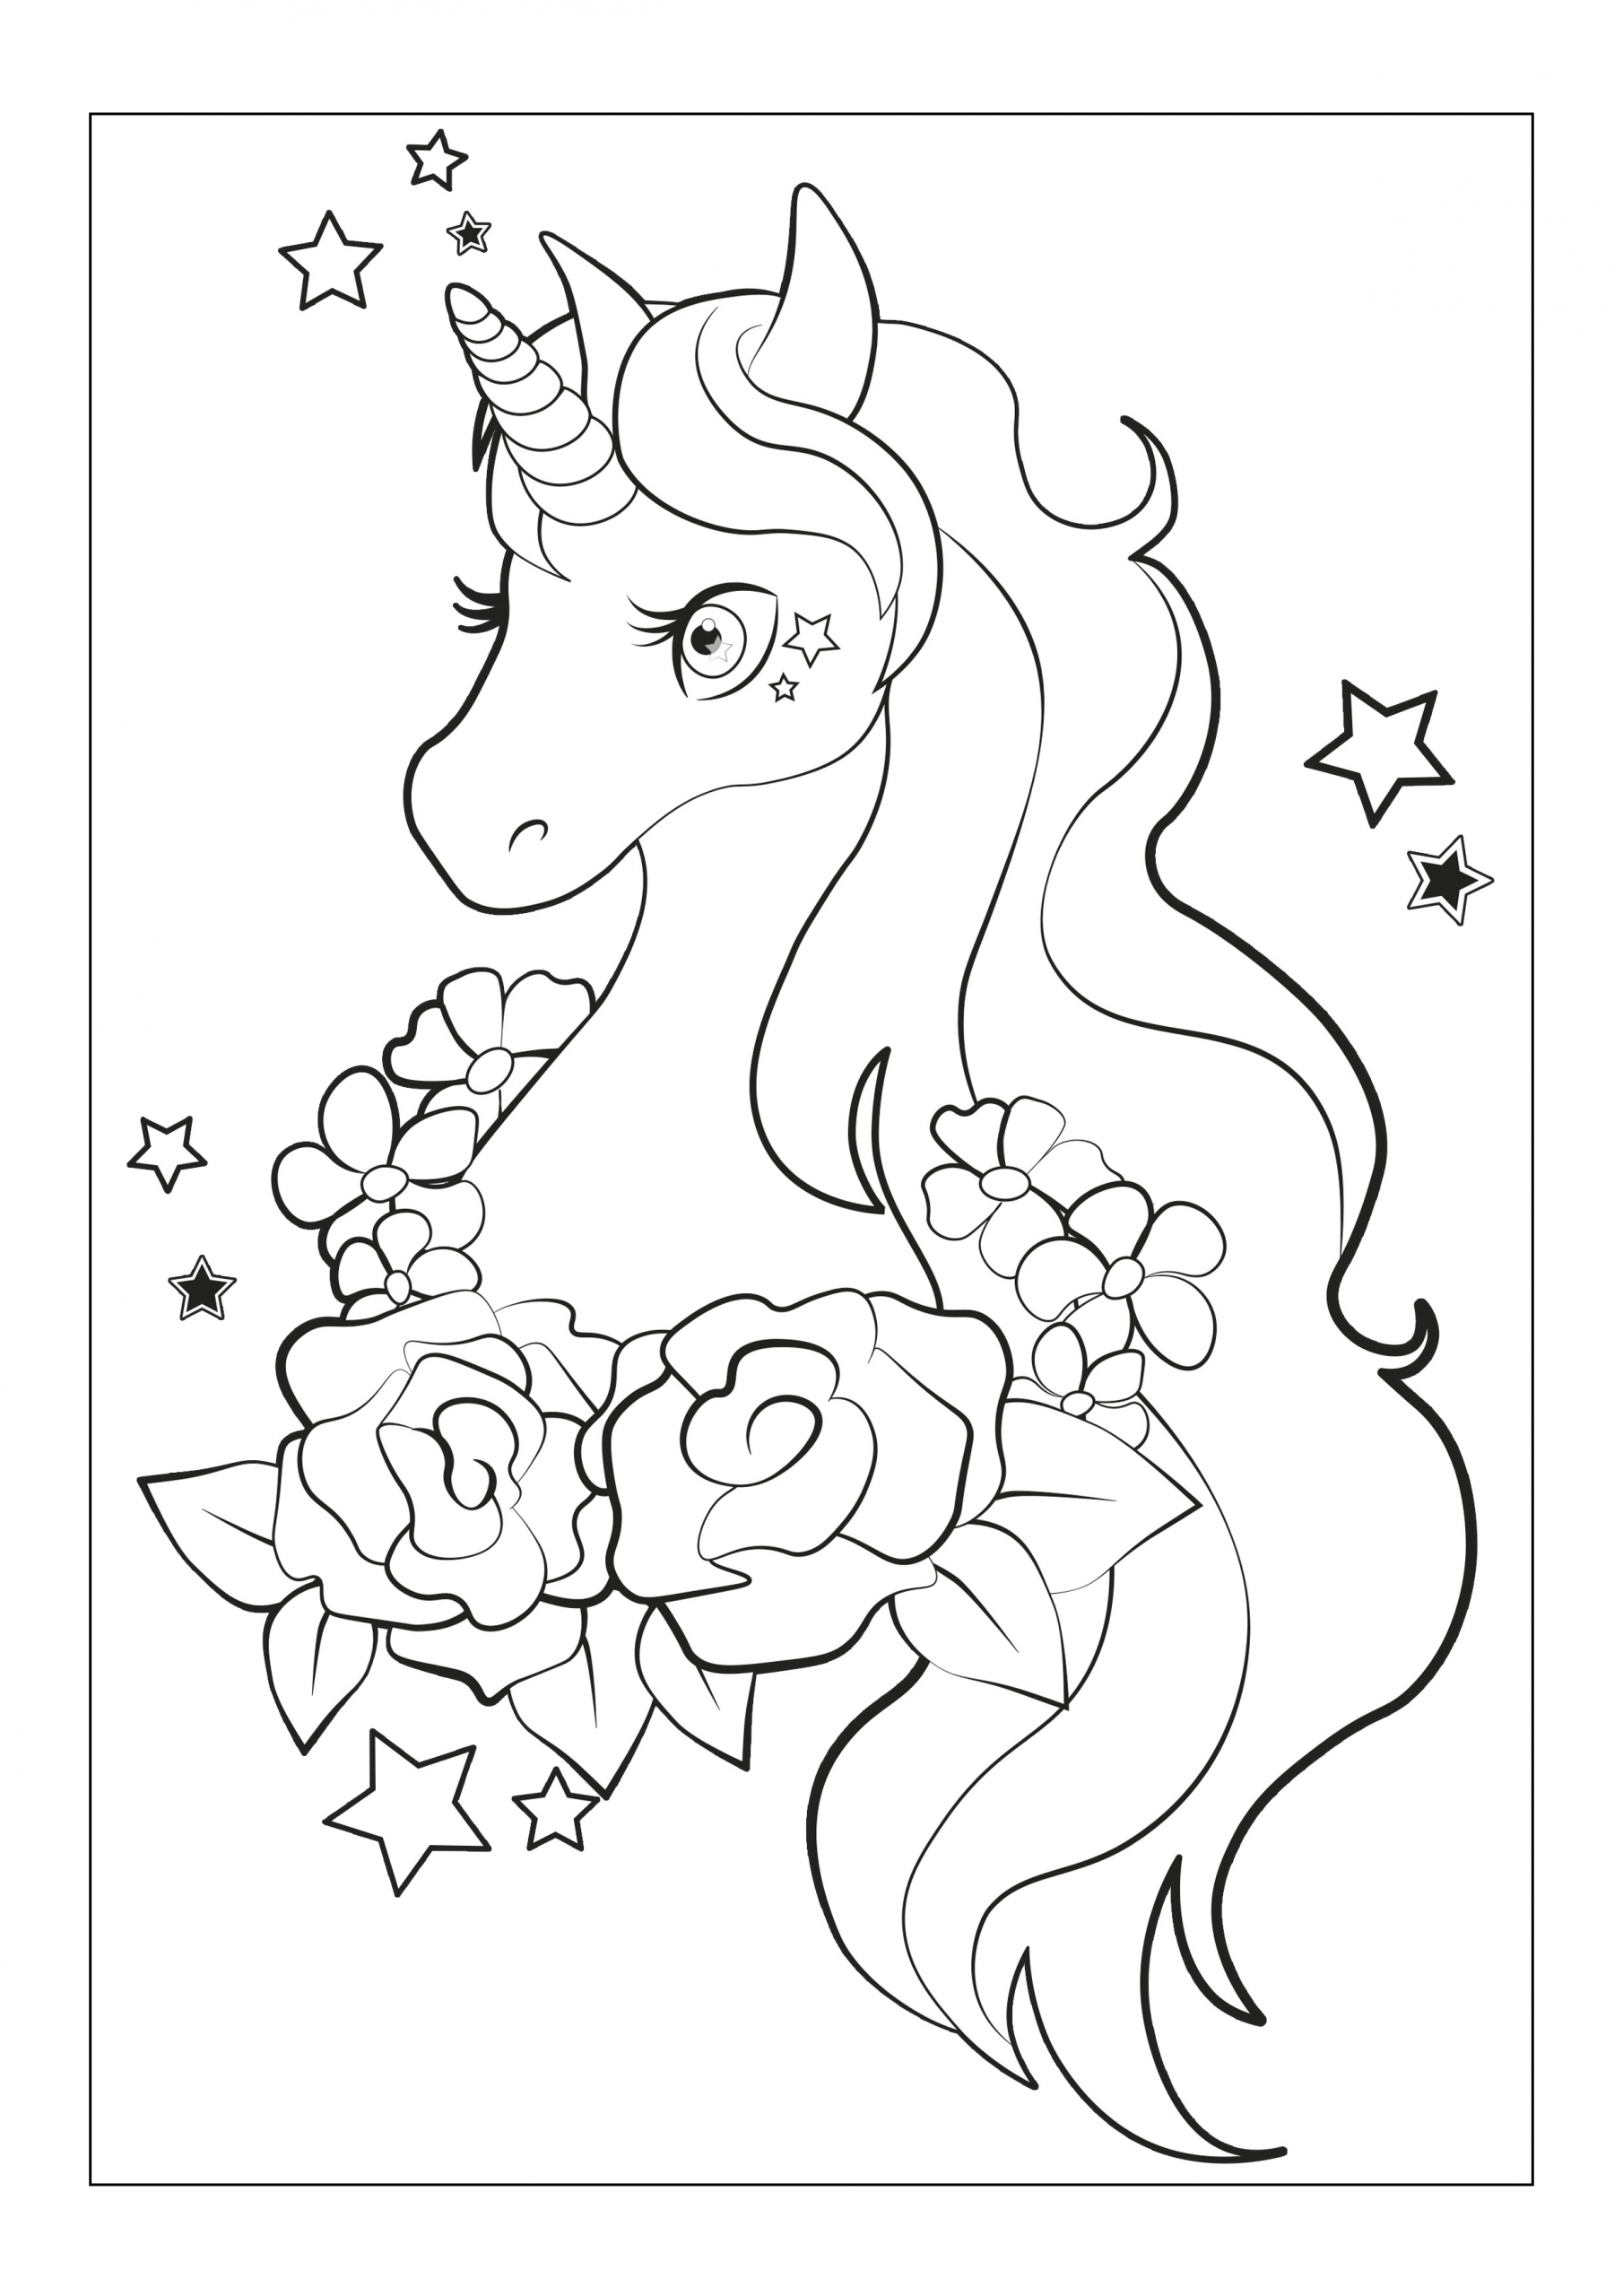 Coloring Pages For Girls Printable
 The Best Free Coloring Pages For Girls